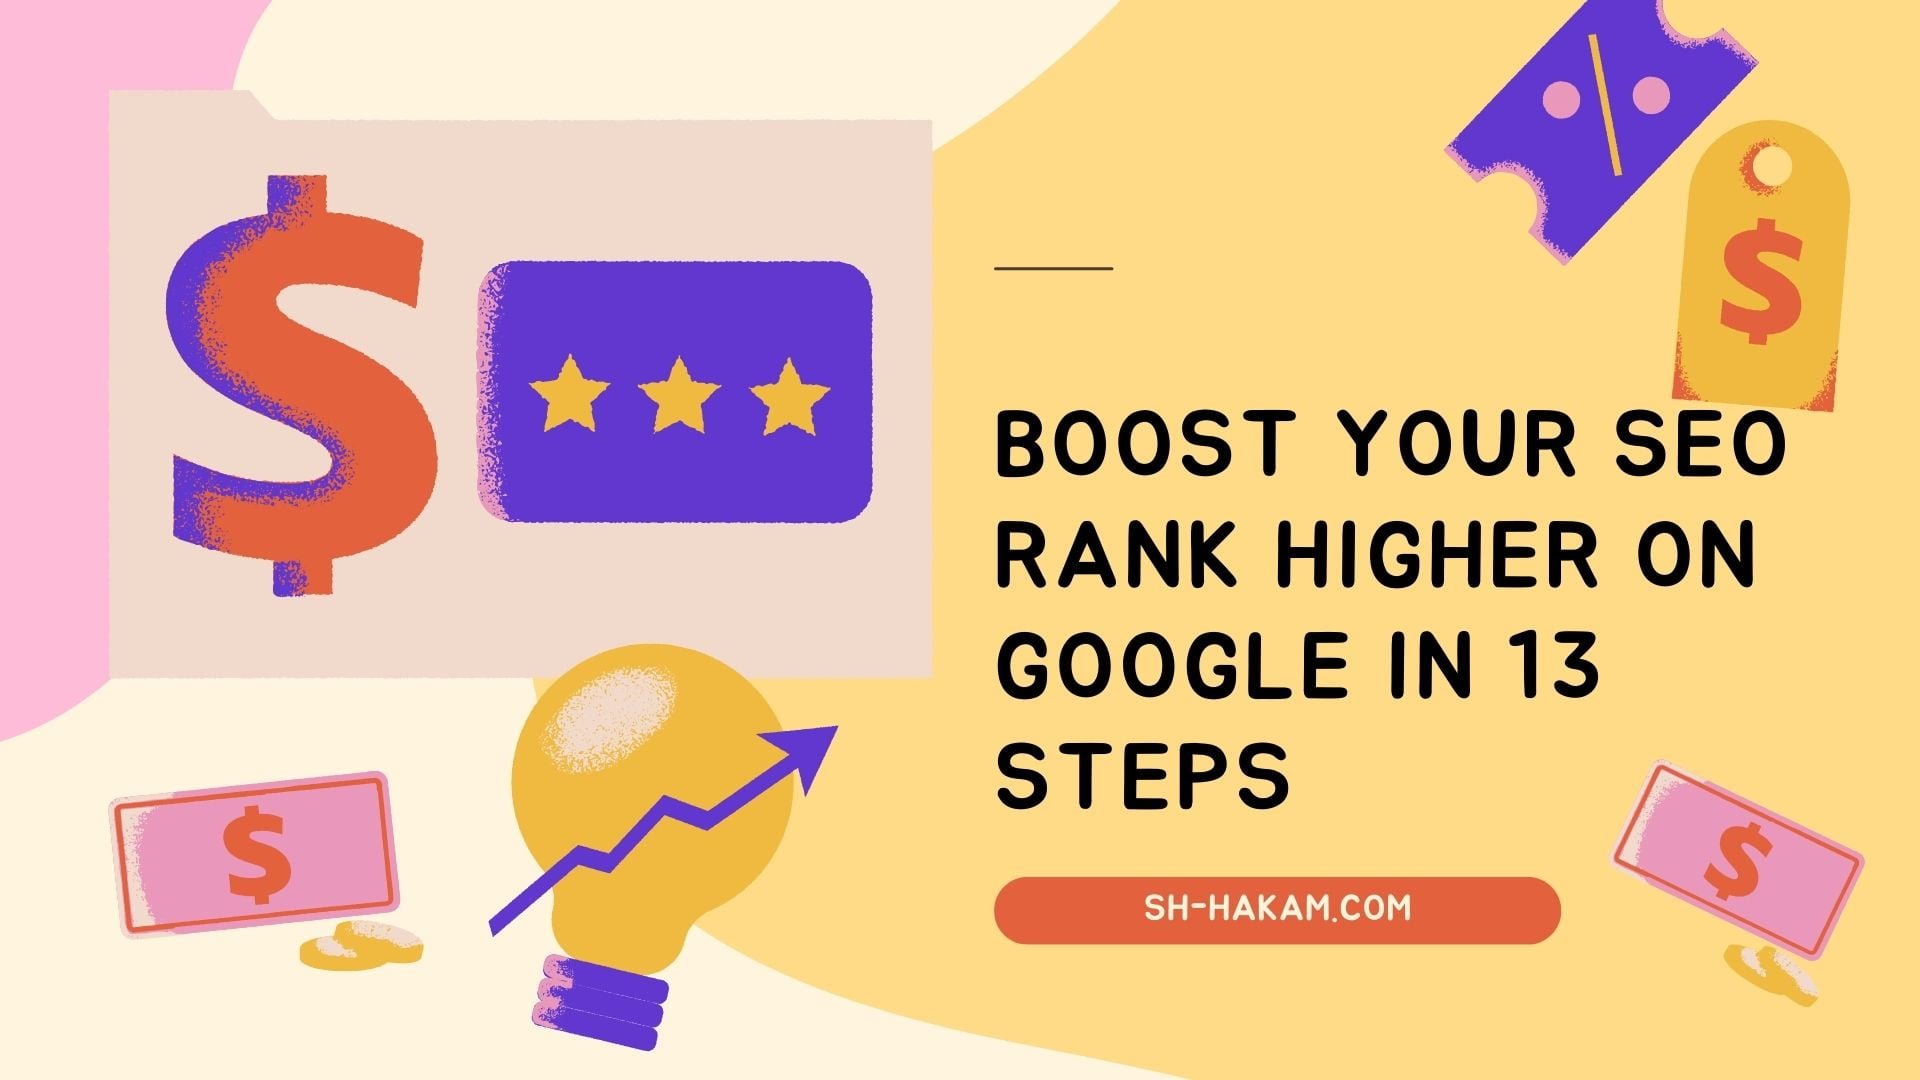 Boost Your Seo Rank Higher On Google In 13 Steps